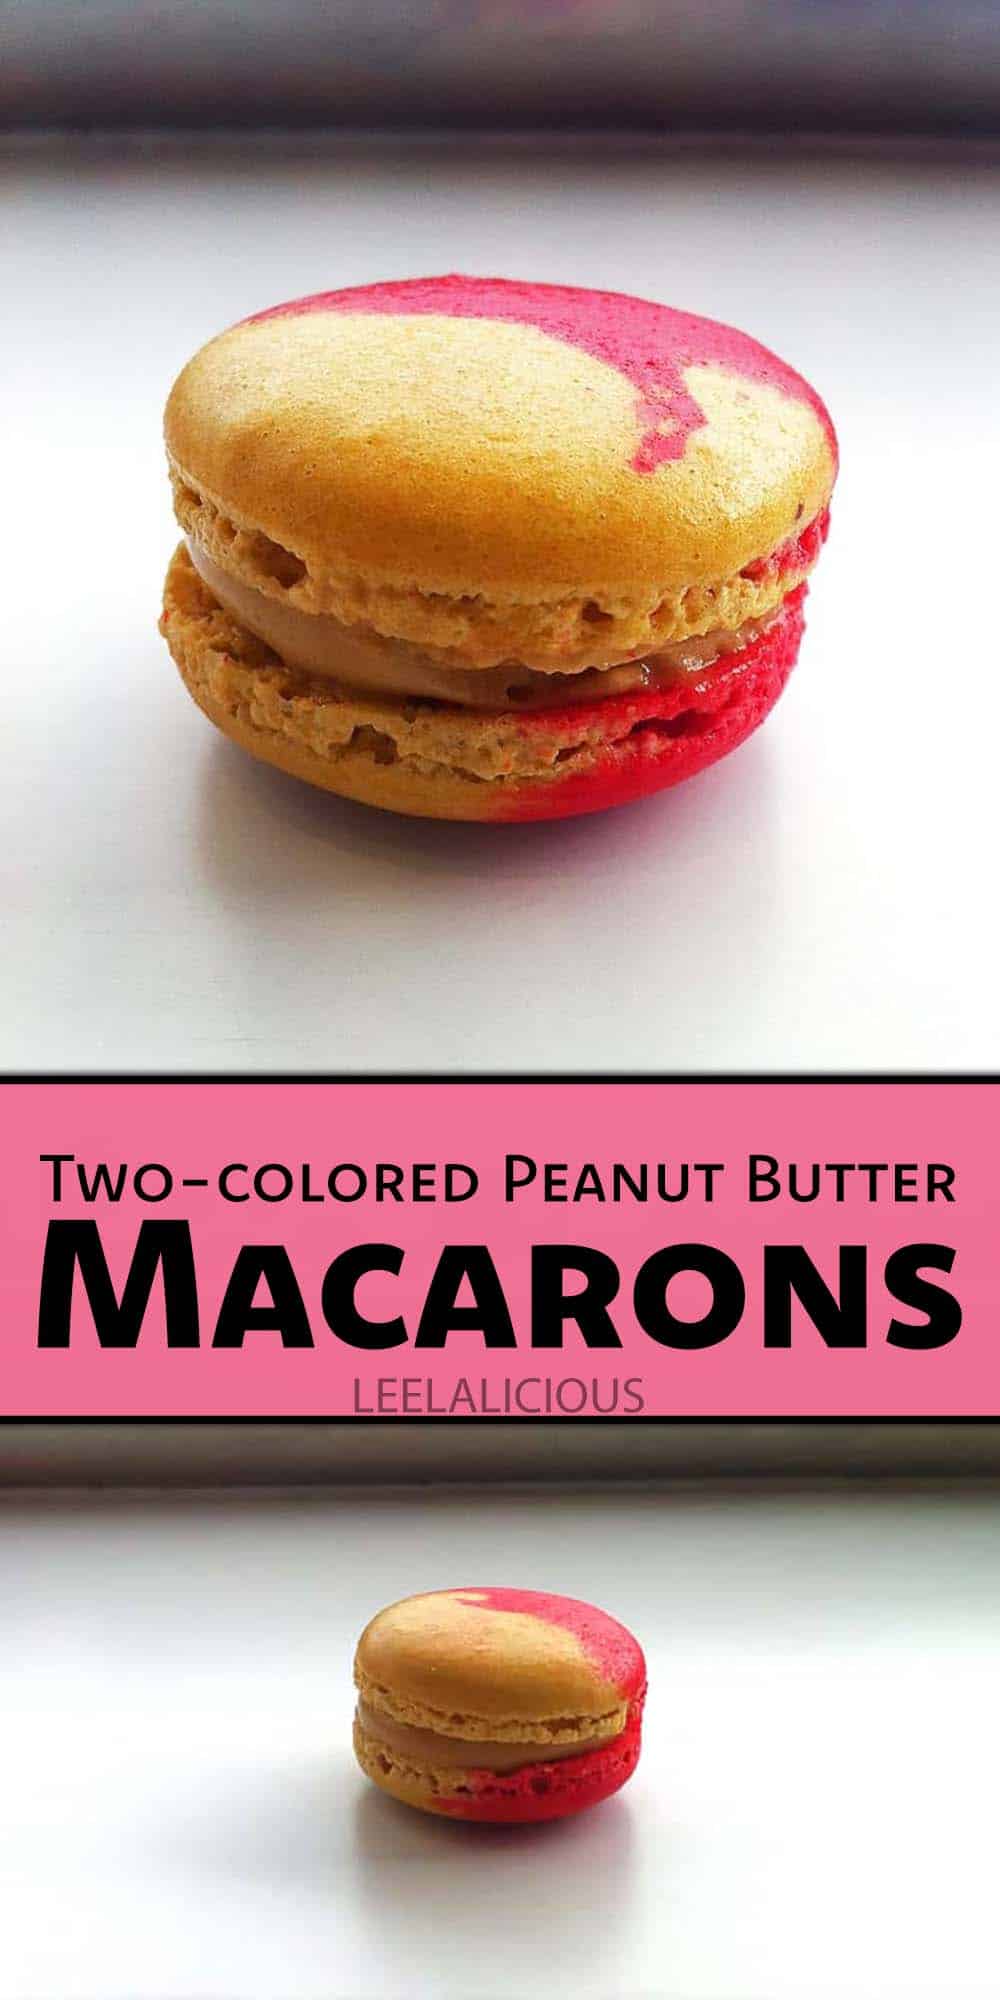 Two-colored Peanut Butter Macarons